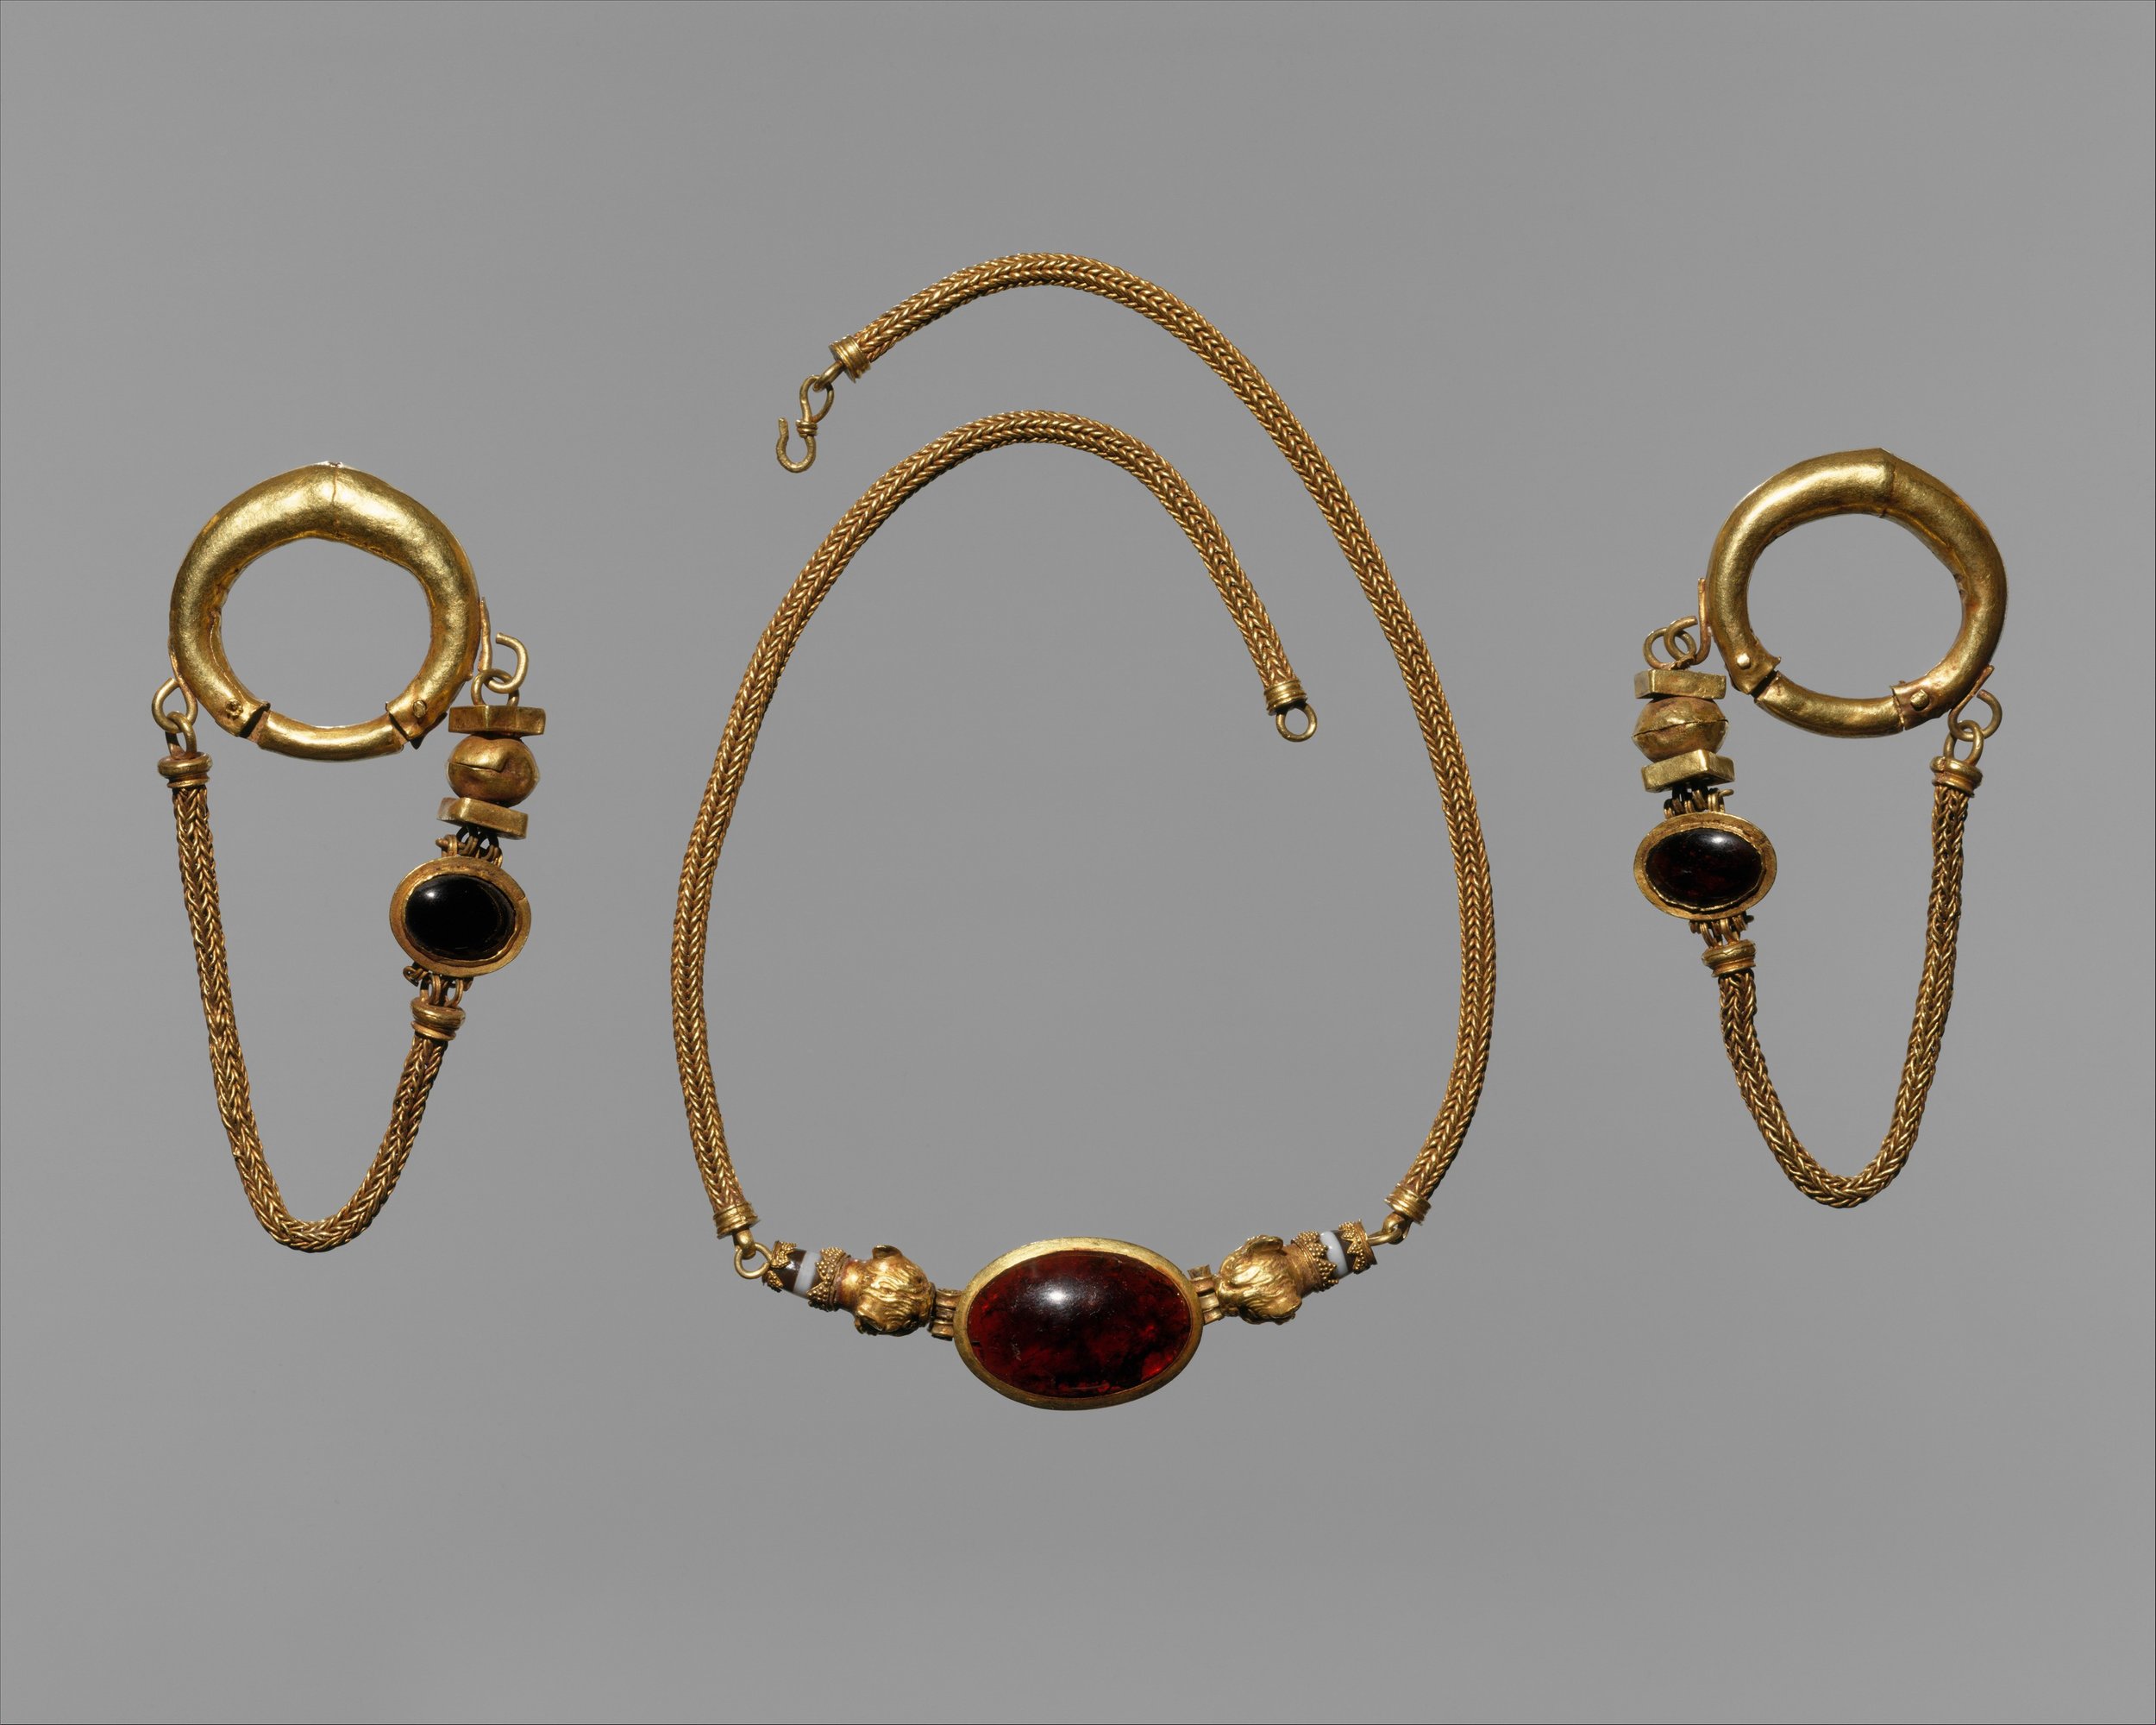  This necklace and earrings from 1st century BCE. form a blingy matching set featuring large garnets.   Courtesy of the Metropolitan Museum of Art   